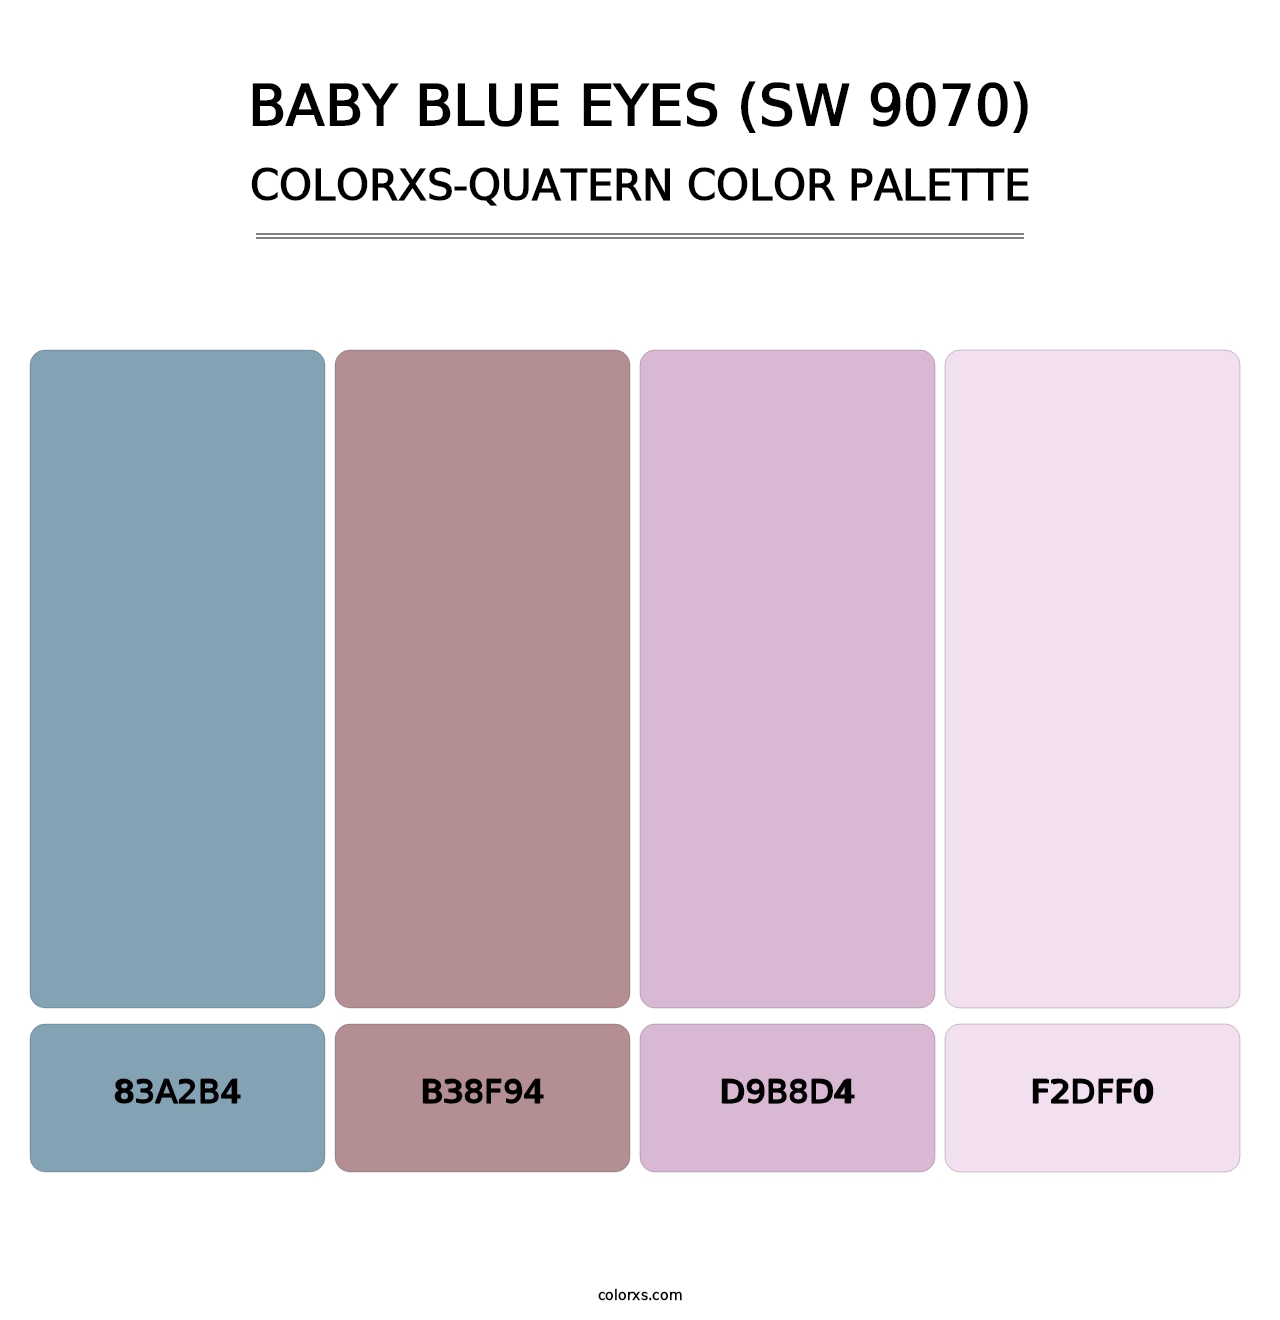 Baby Blue Eyes (SW 9070) - Colorxs Quatern Palette